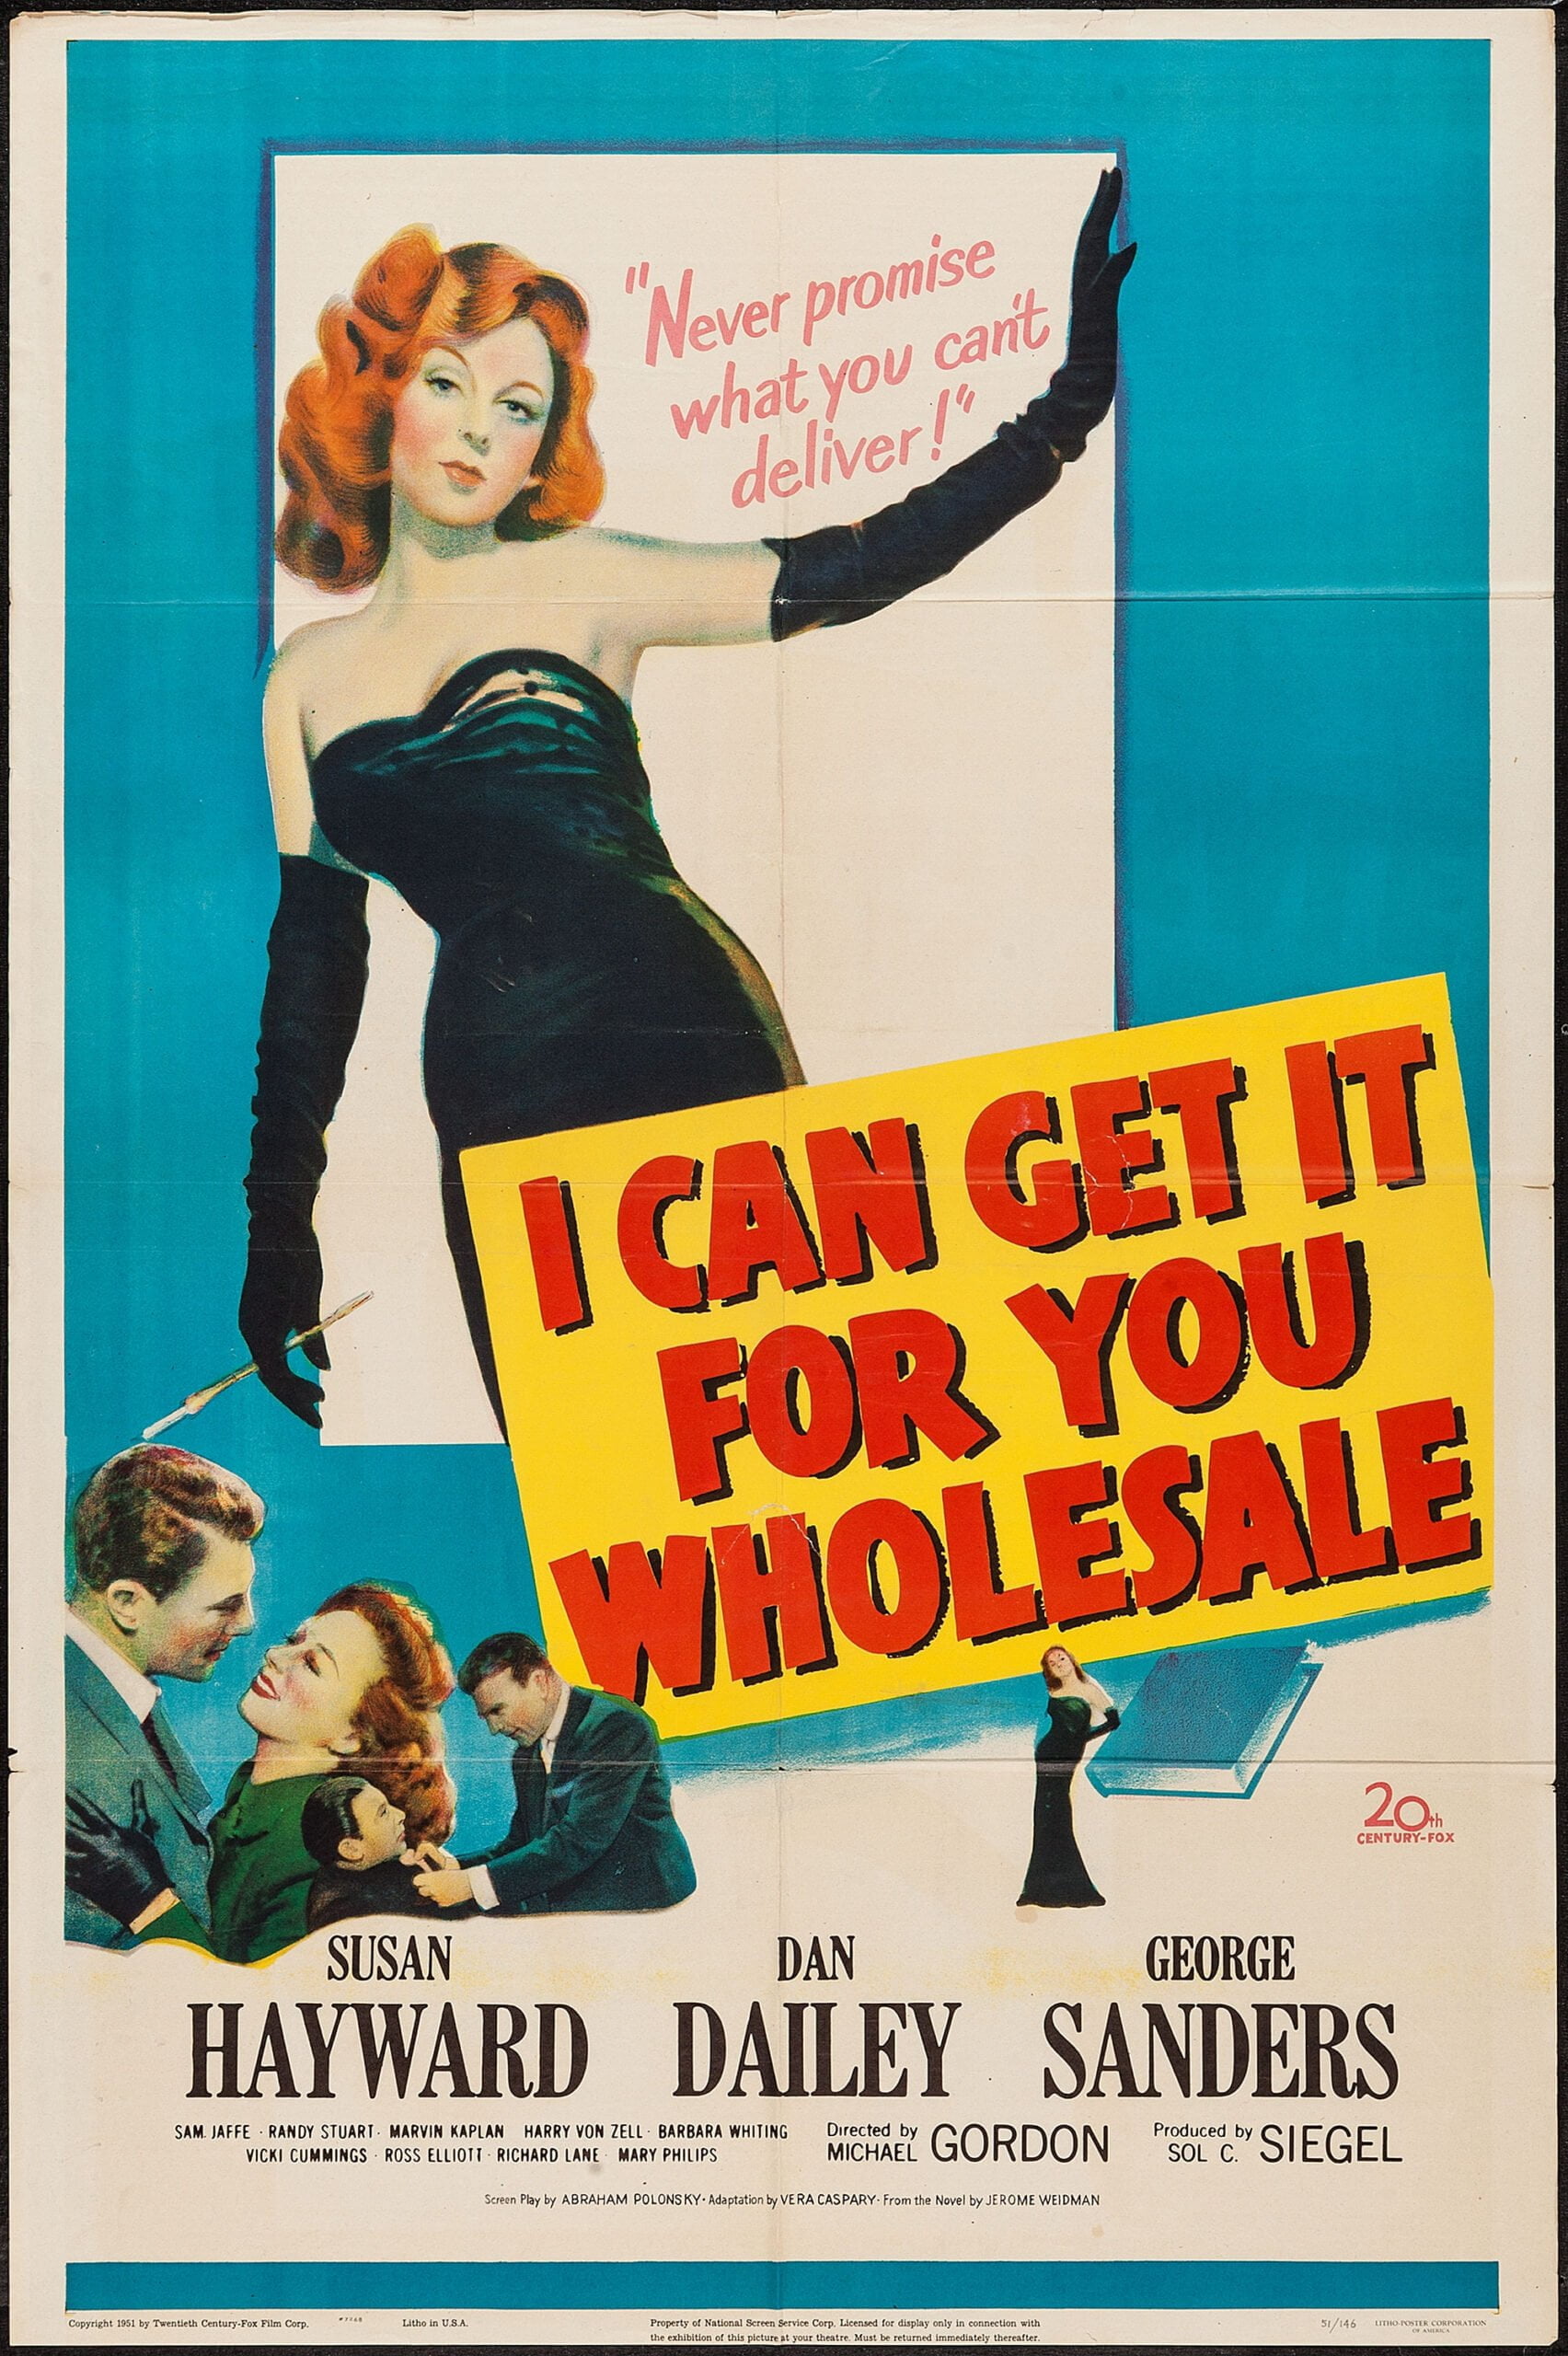 Original vintage cinema movie poster for I Can Get it for You Wholesale